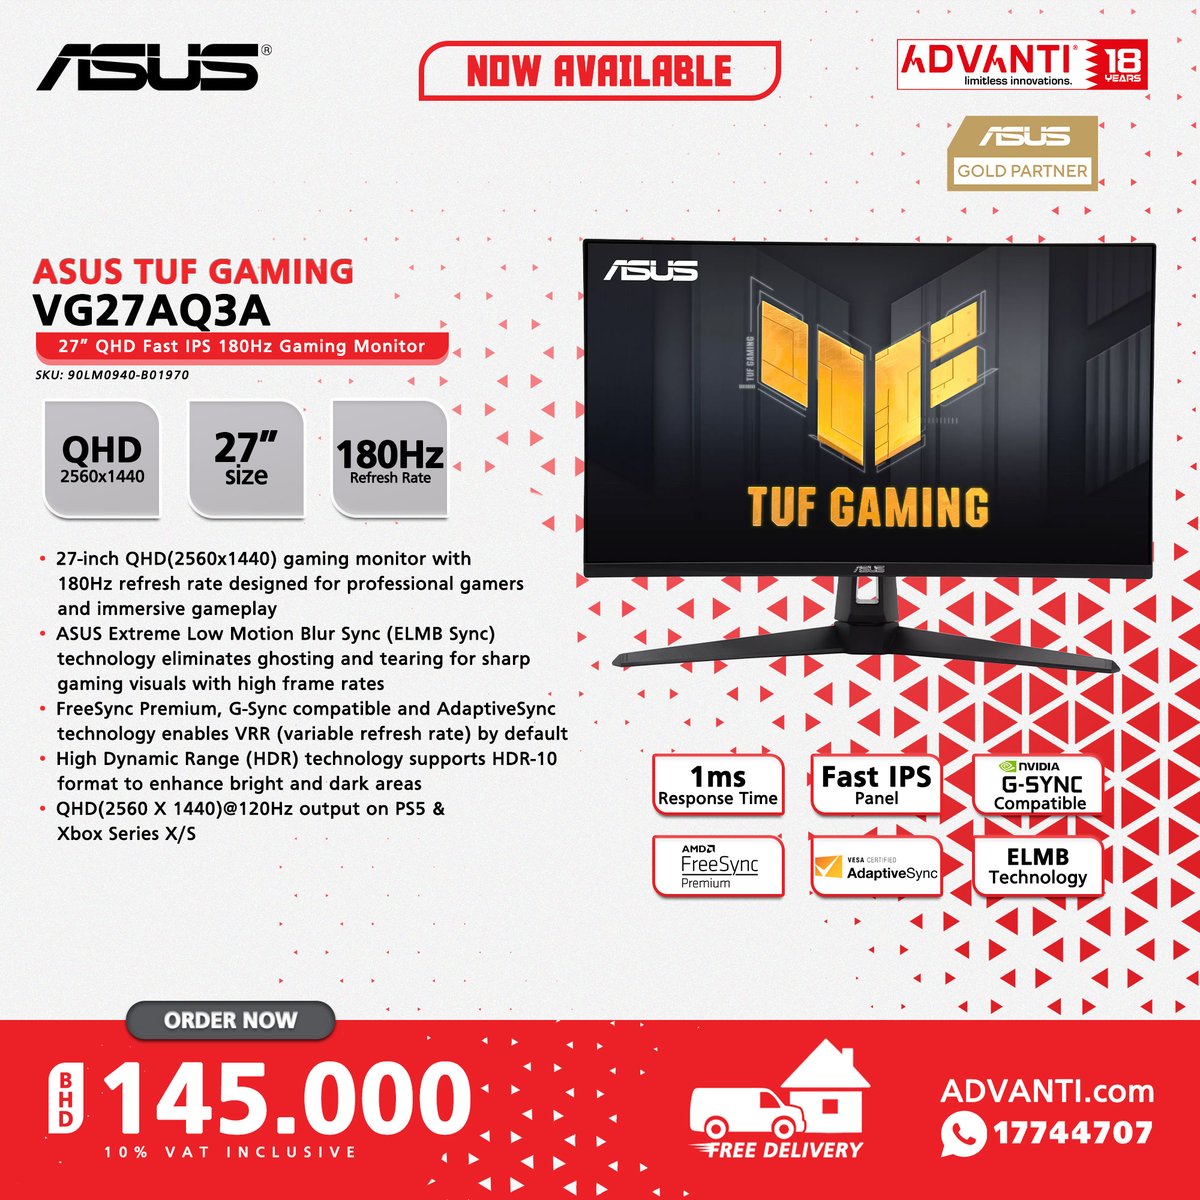 ◀Swipe Left for more!
🔽NOW AVAILABLE!🔽

🔴ASUS TUF Gaming Monitors!🔴

📦 FREE DELIVERY! 🚚
▶10% VAT Inclusive

#ADVANTI #Asus #TUFGaming #Monitors #Bahrain #Manama #Saar